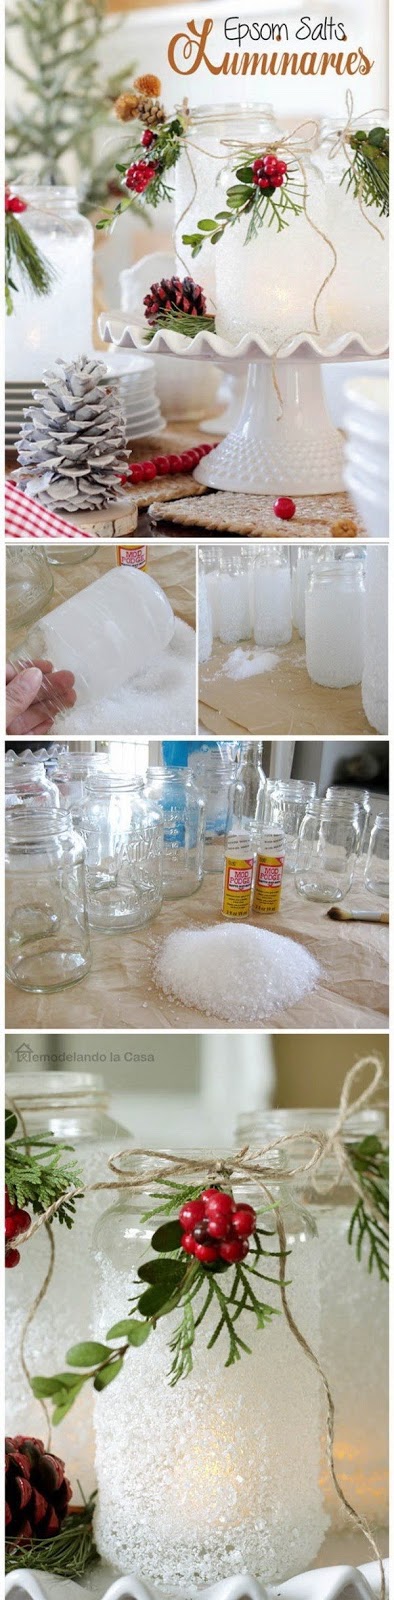 Mason jars covered in epsom salts to create a beautiful Christmas centerpiece